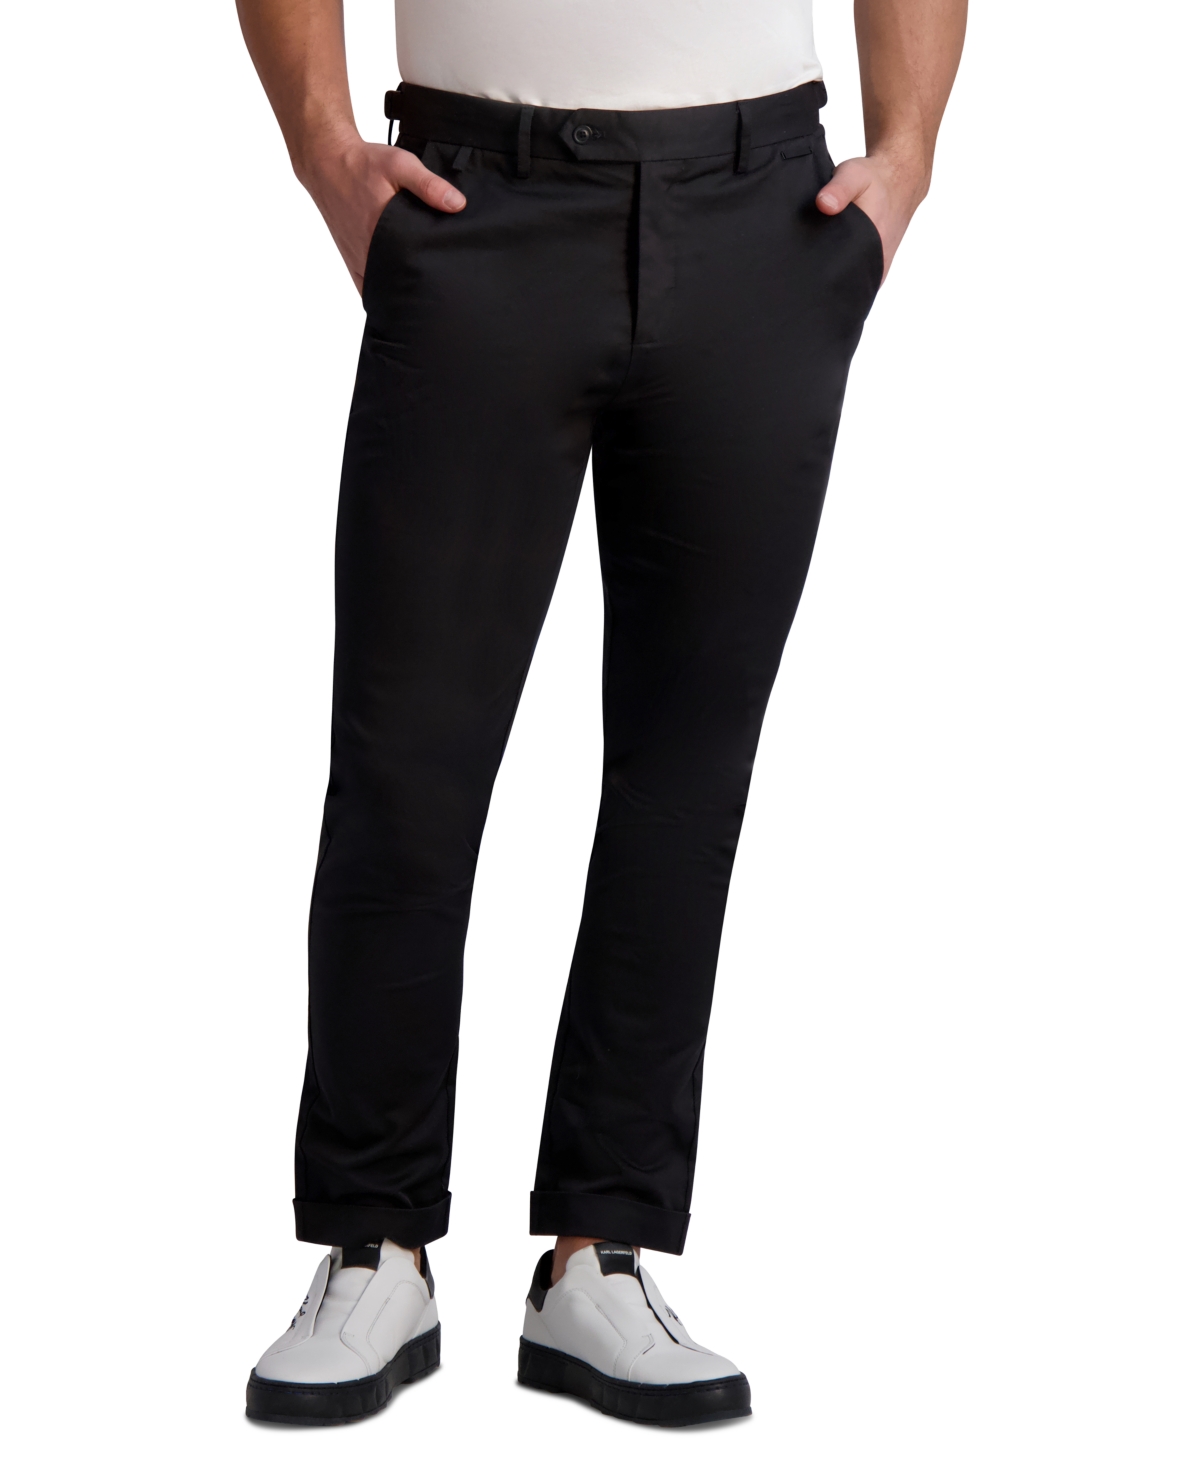 KARL LAGERFELD MEN'S SLIM-FIT STRETCH CHINO PANTS, CREATED FOR MACY'S